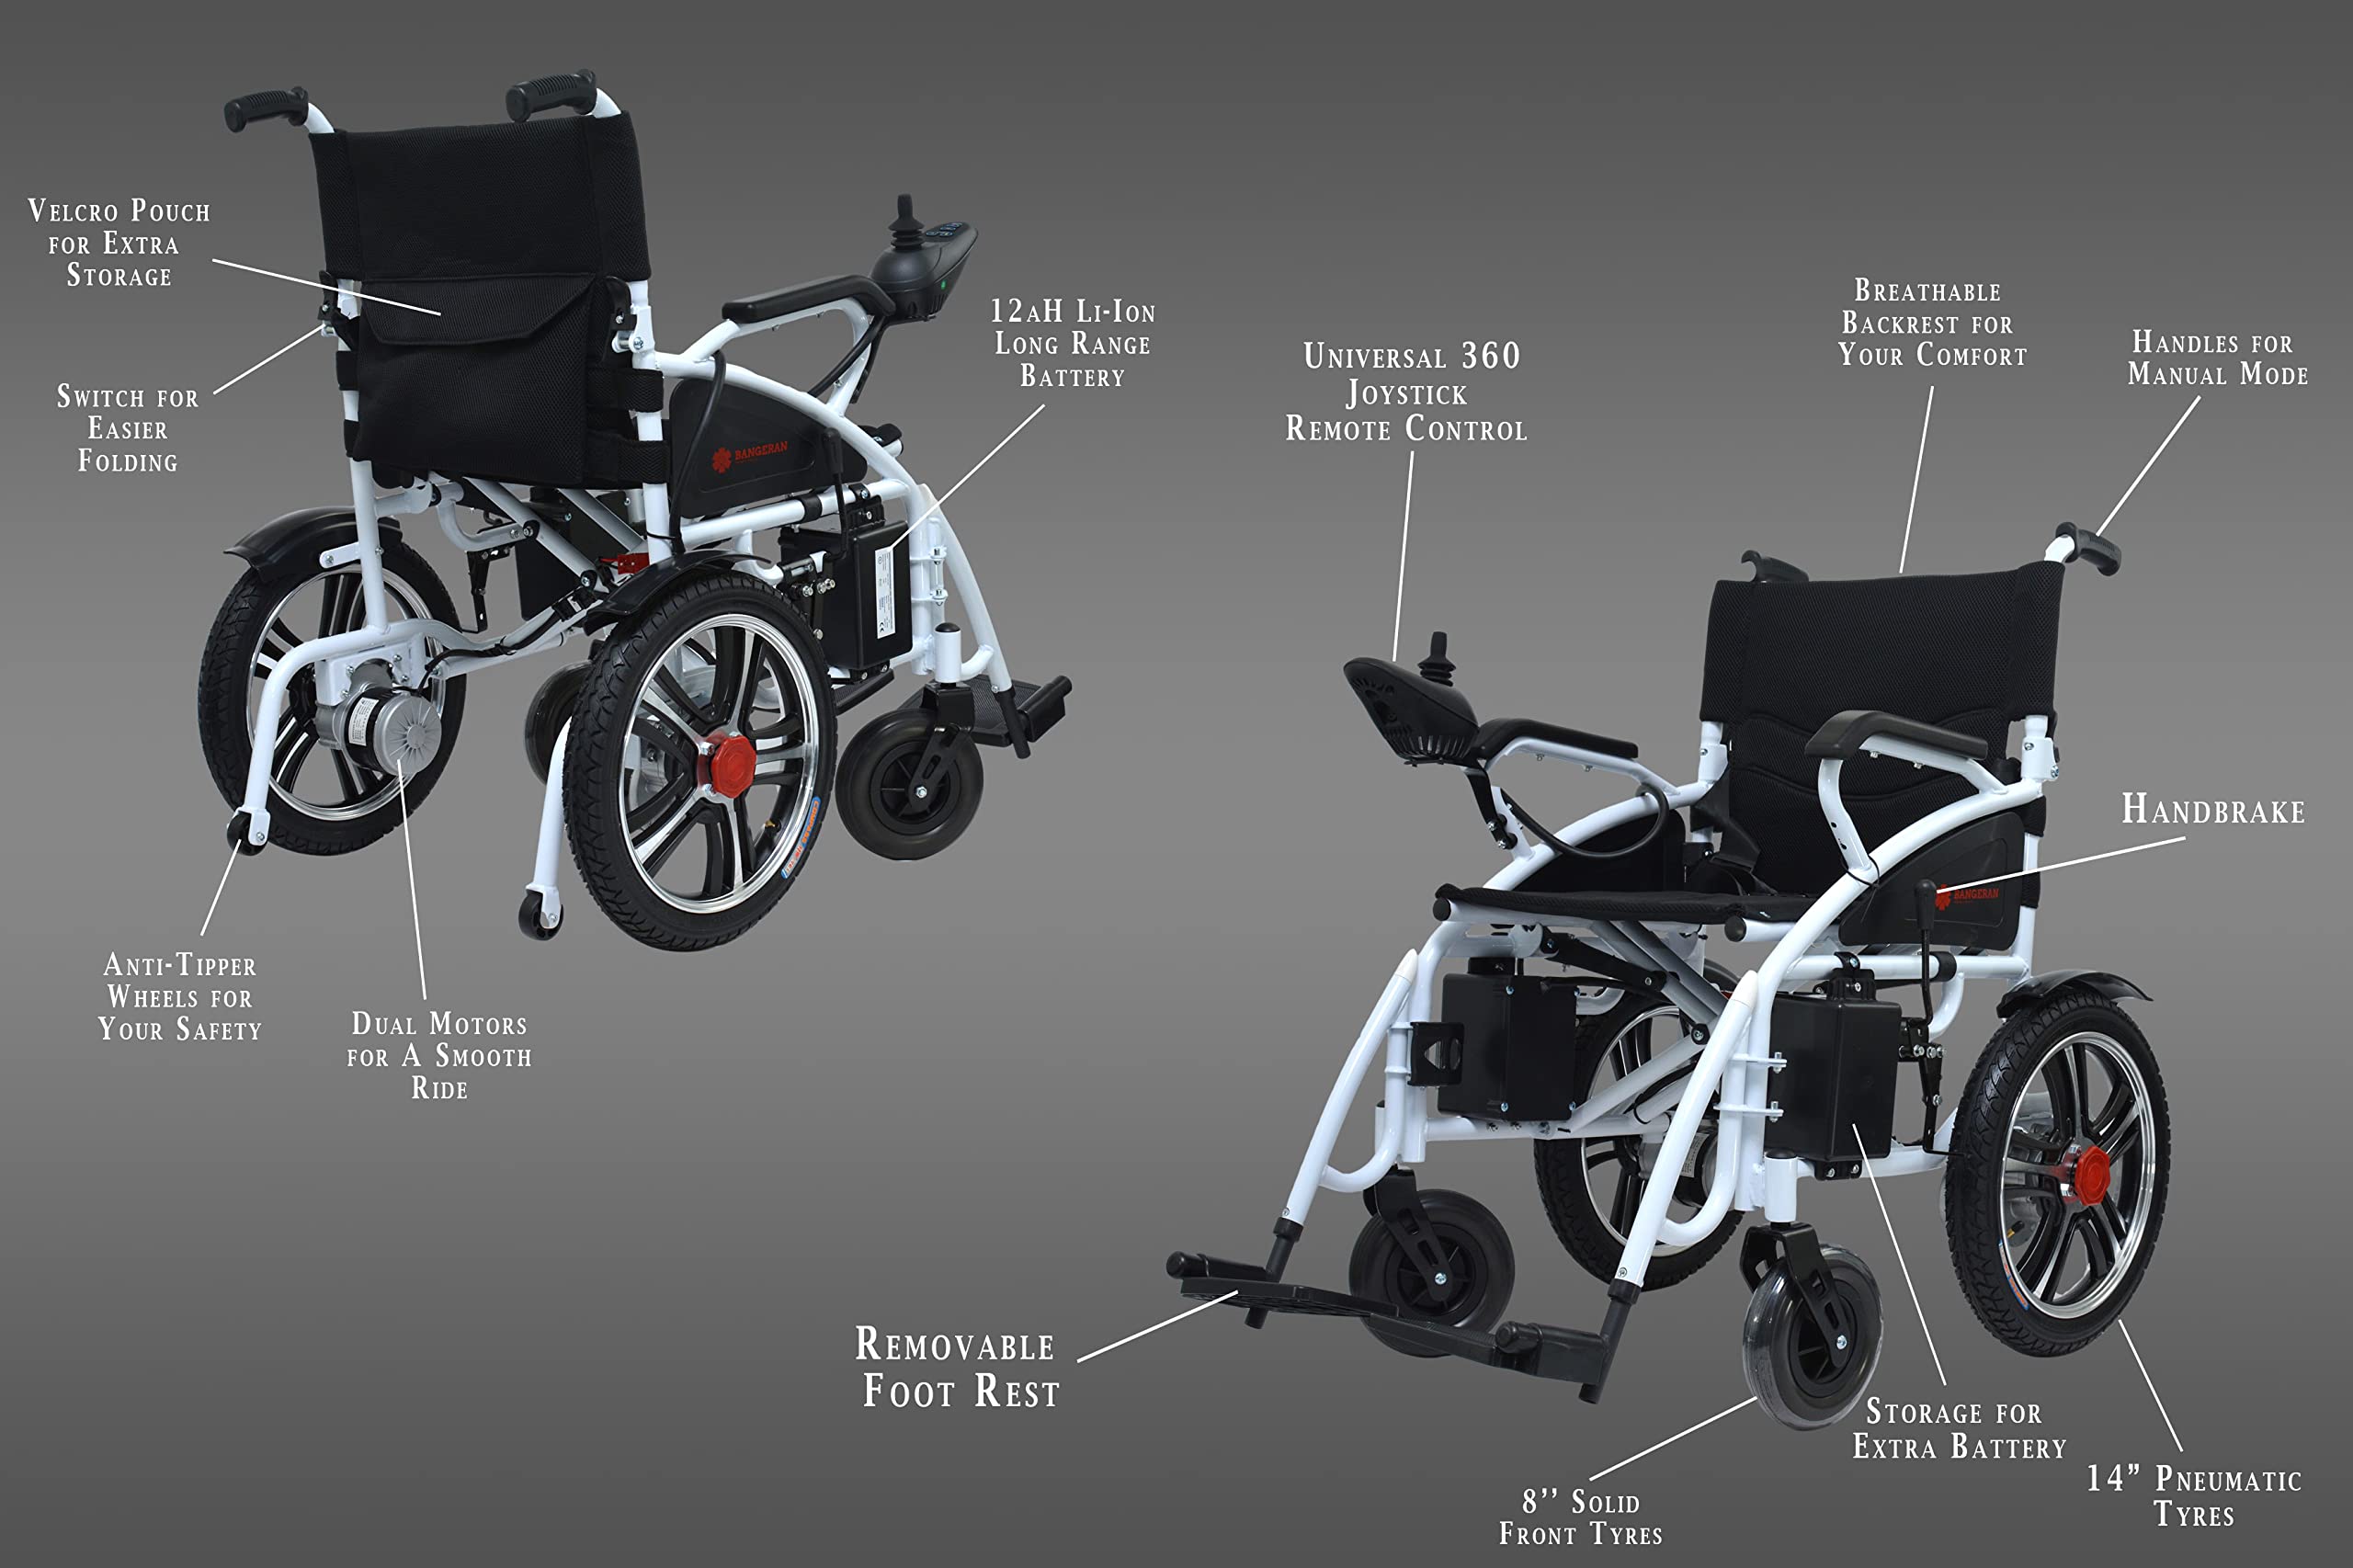 Mobilitas Z Foldable,Compact Electric Wheelchair for Adults and Seniors,Lightweight Power Wheelchair in Affordable Category, Durable Wheelchair, Silla de Ruedas Electrica, Dual Motor (White on Black)